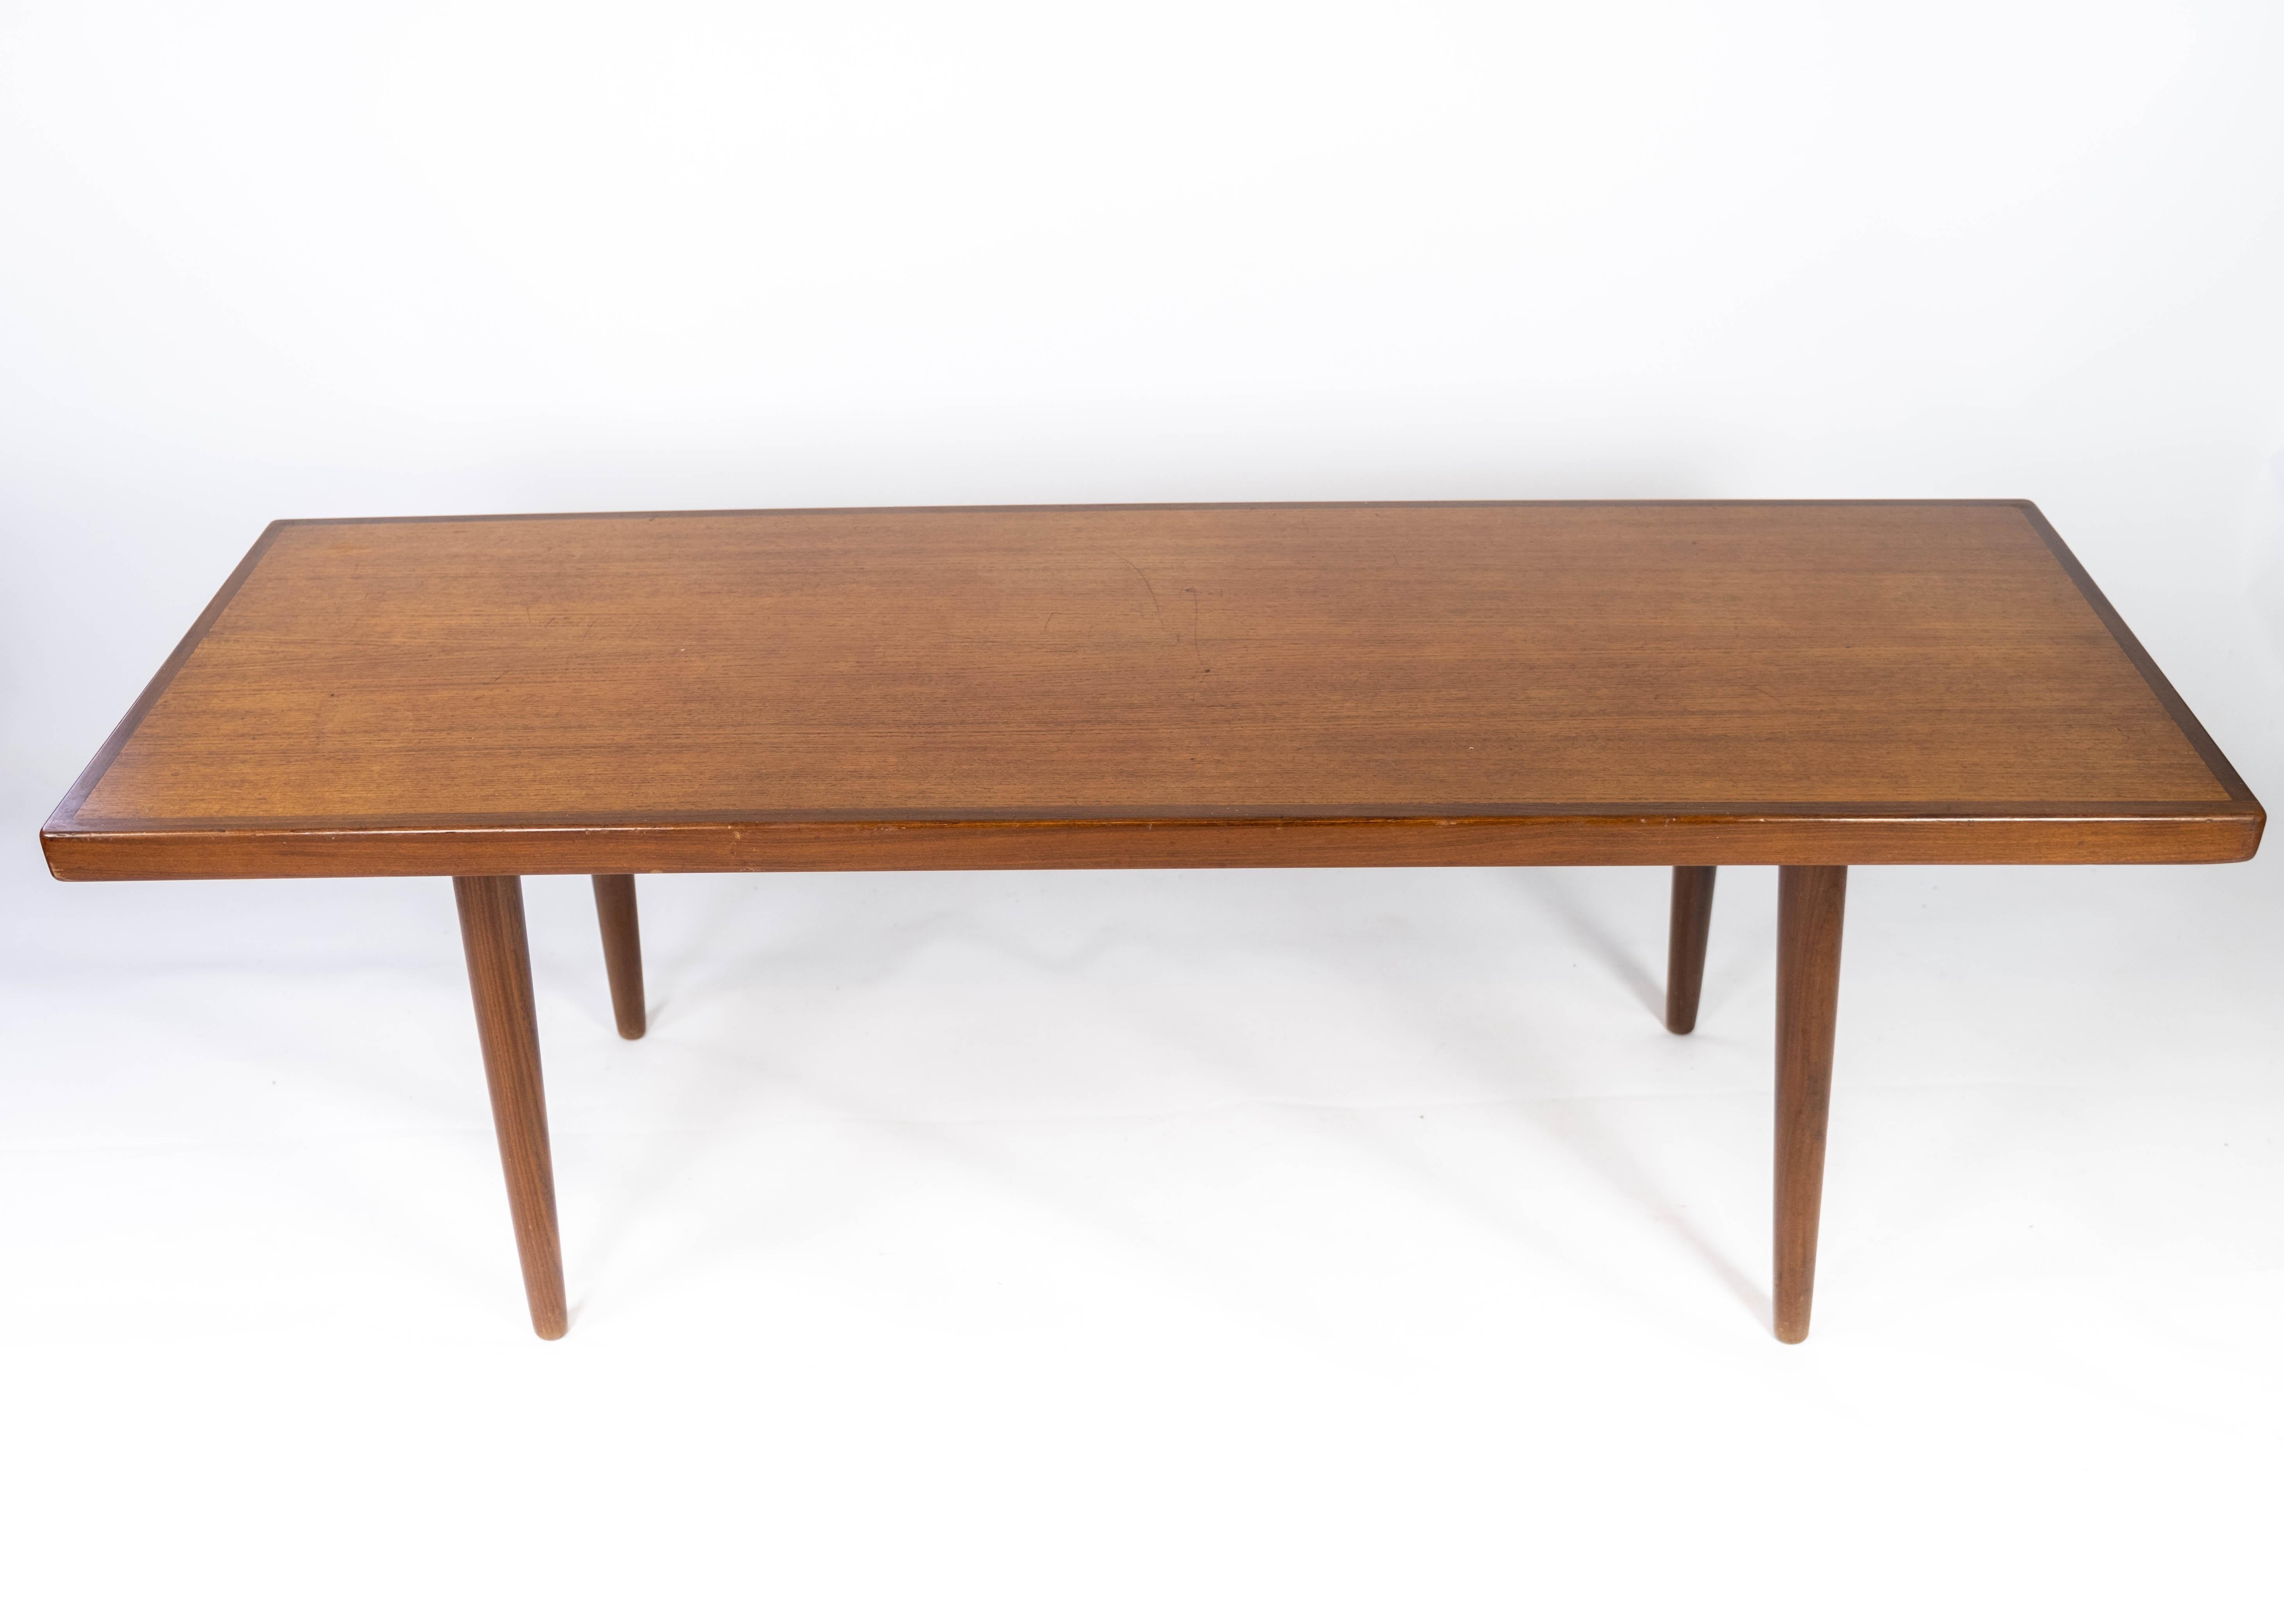 
This teak coffee table epitomizes the elegance and craftsmanship of Danish design from the 1960s. Crafted with precision and attention to detail, it boasts a timeless appeal that adds sophistication to any living space.

The rich tones and grain